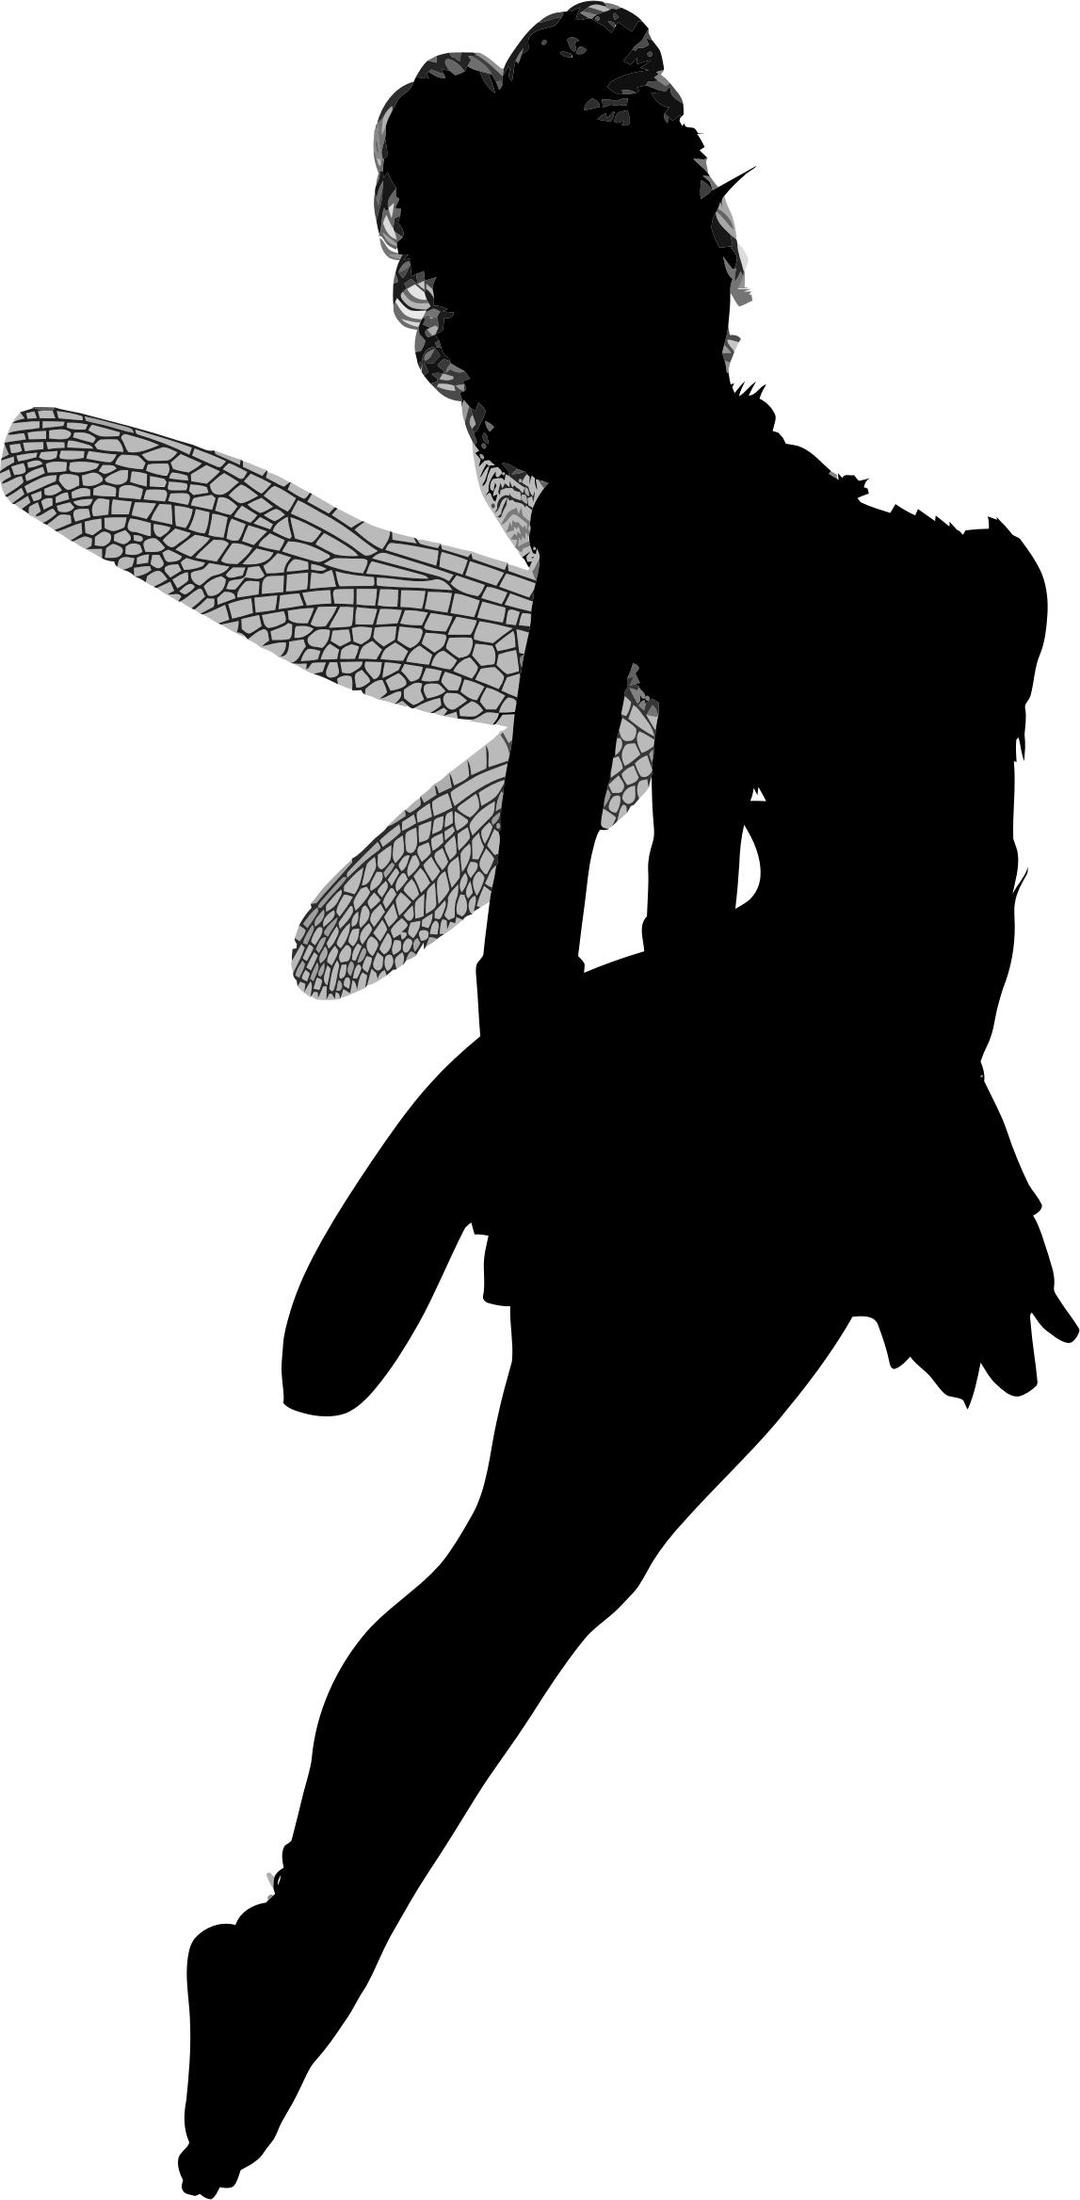 Translucent Wings Fairy Silhouette png transparent